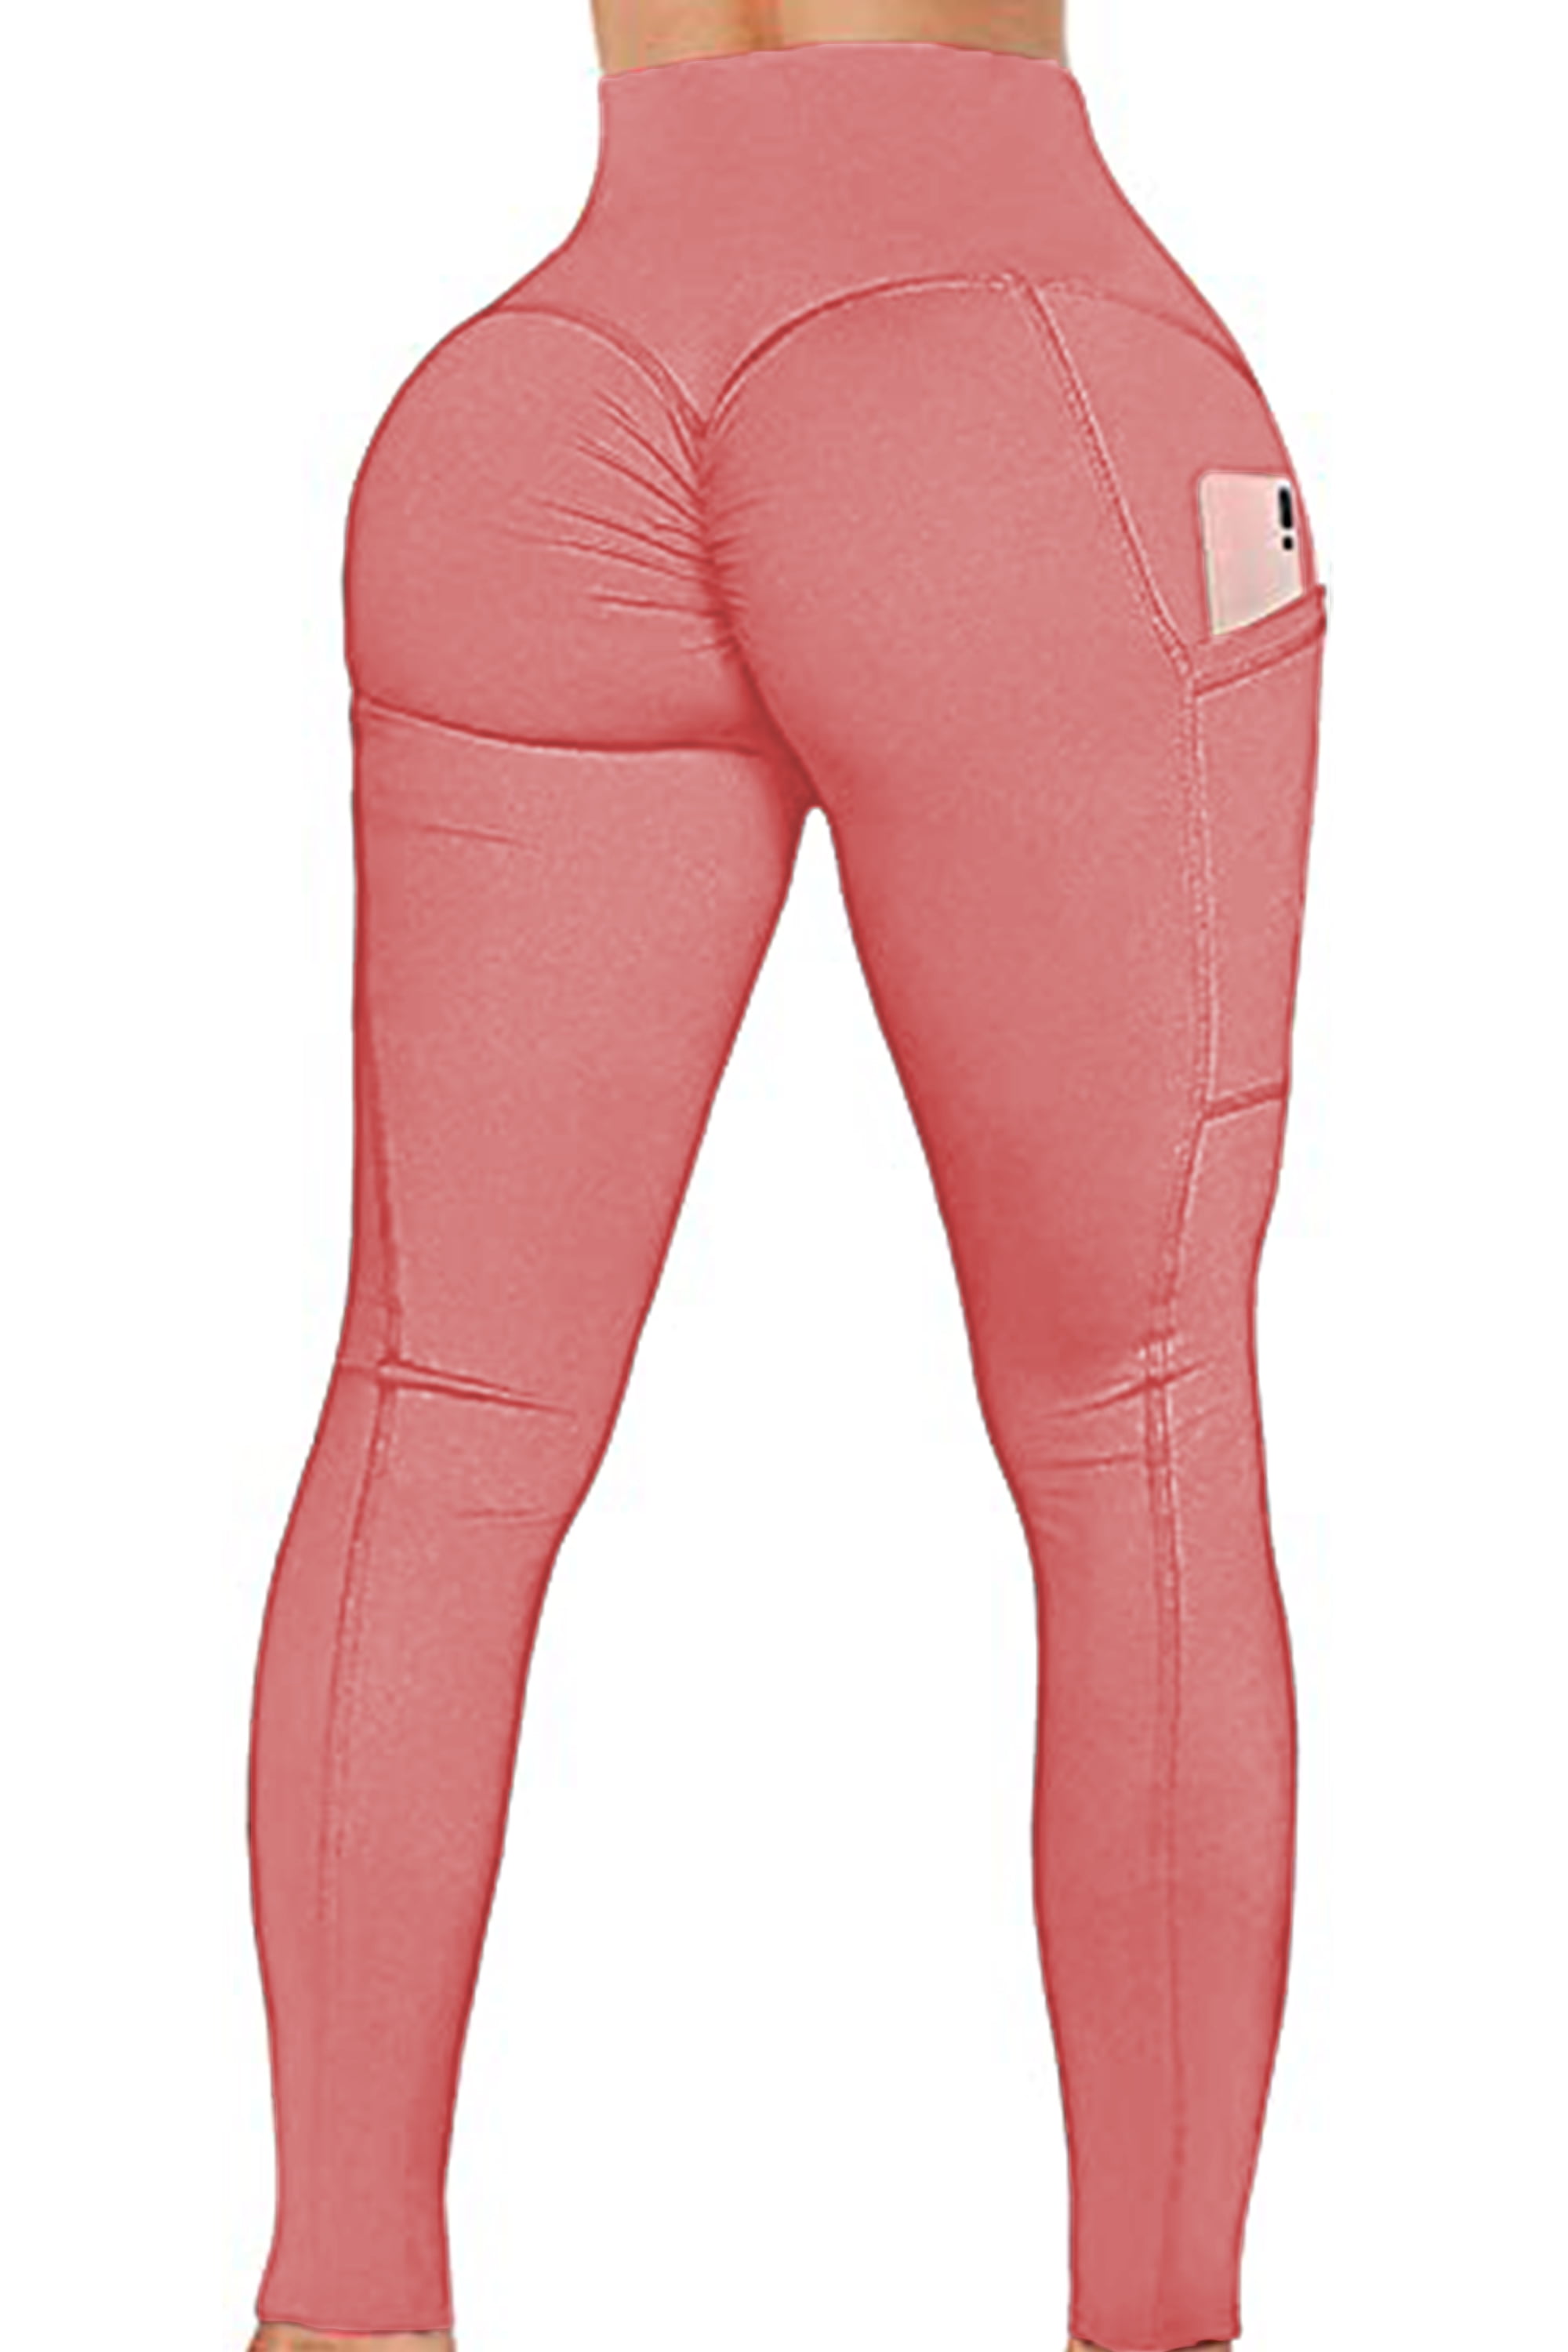 Fittoo Fittoo Scrunch Butt Leggings Side Pockets Yoga Pant Booty